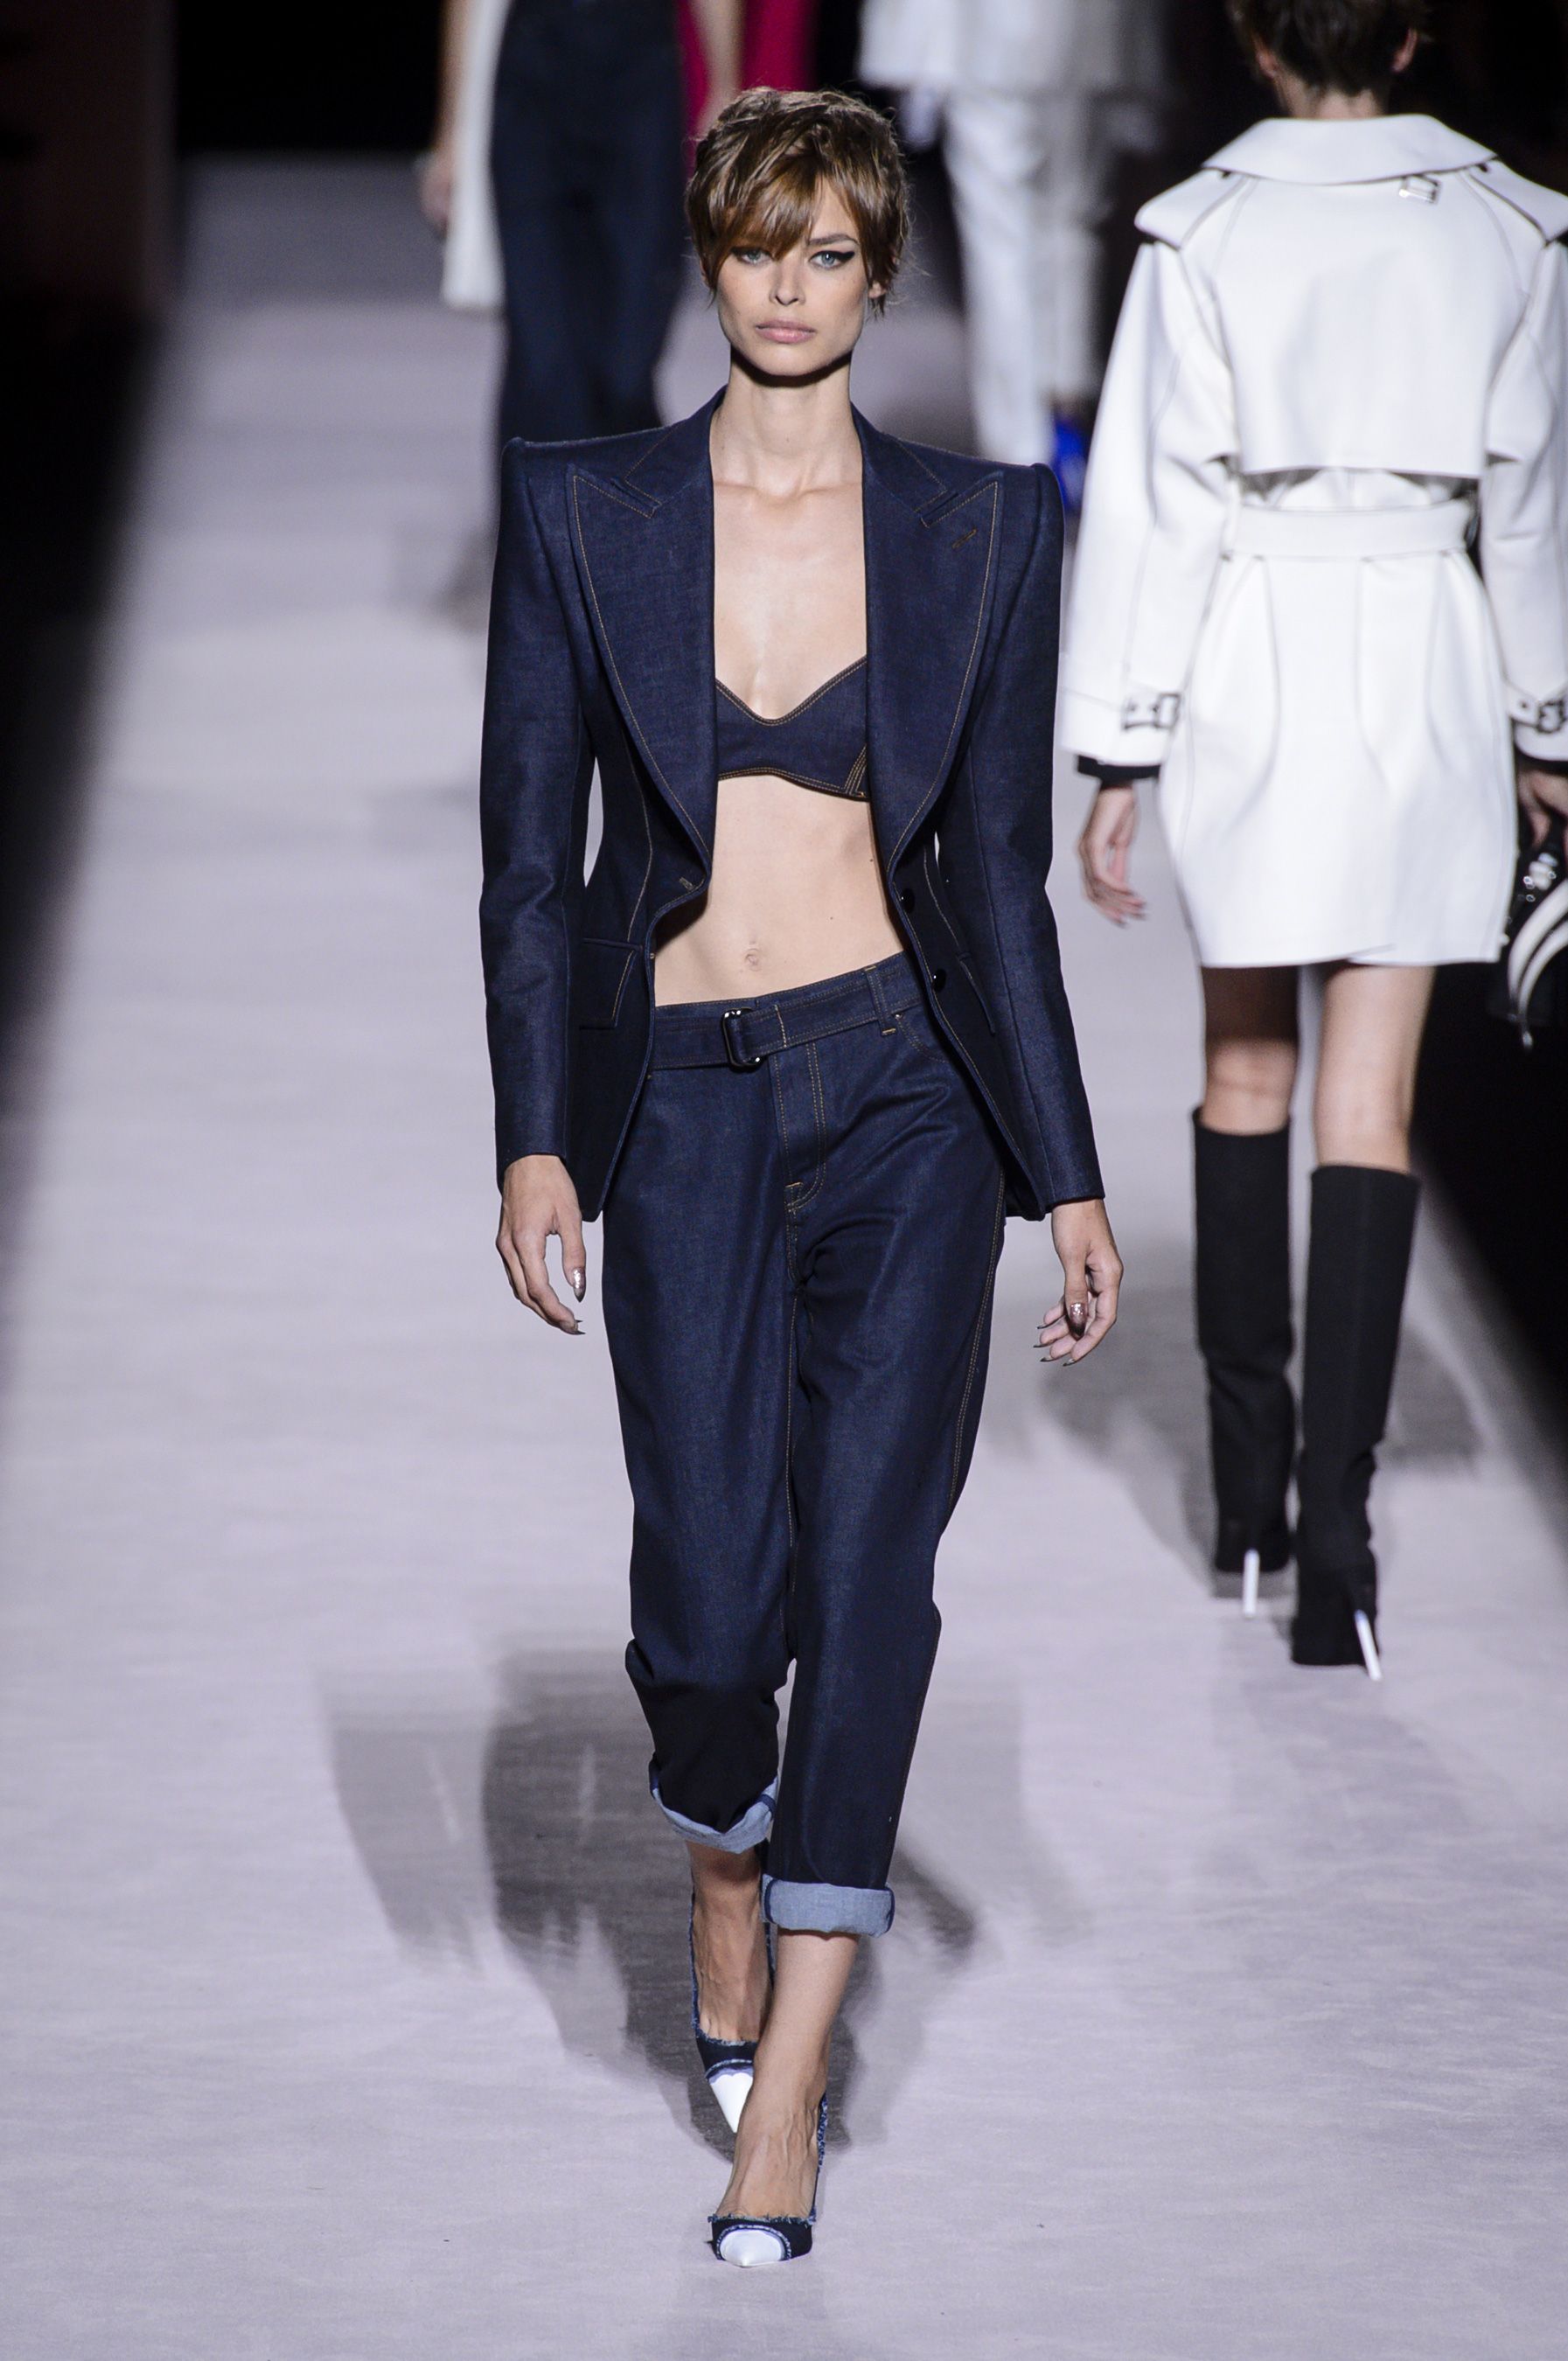 Tom Ford SS18 Runway Show - Tom Ford Collection Fashion Week